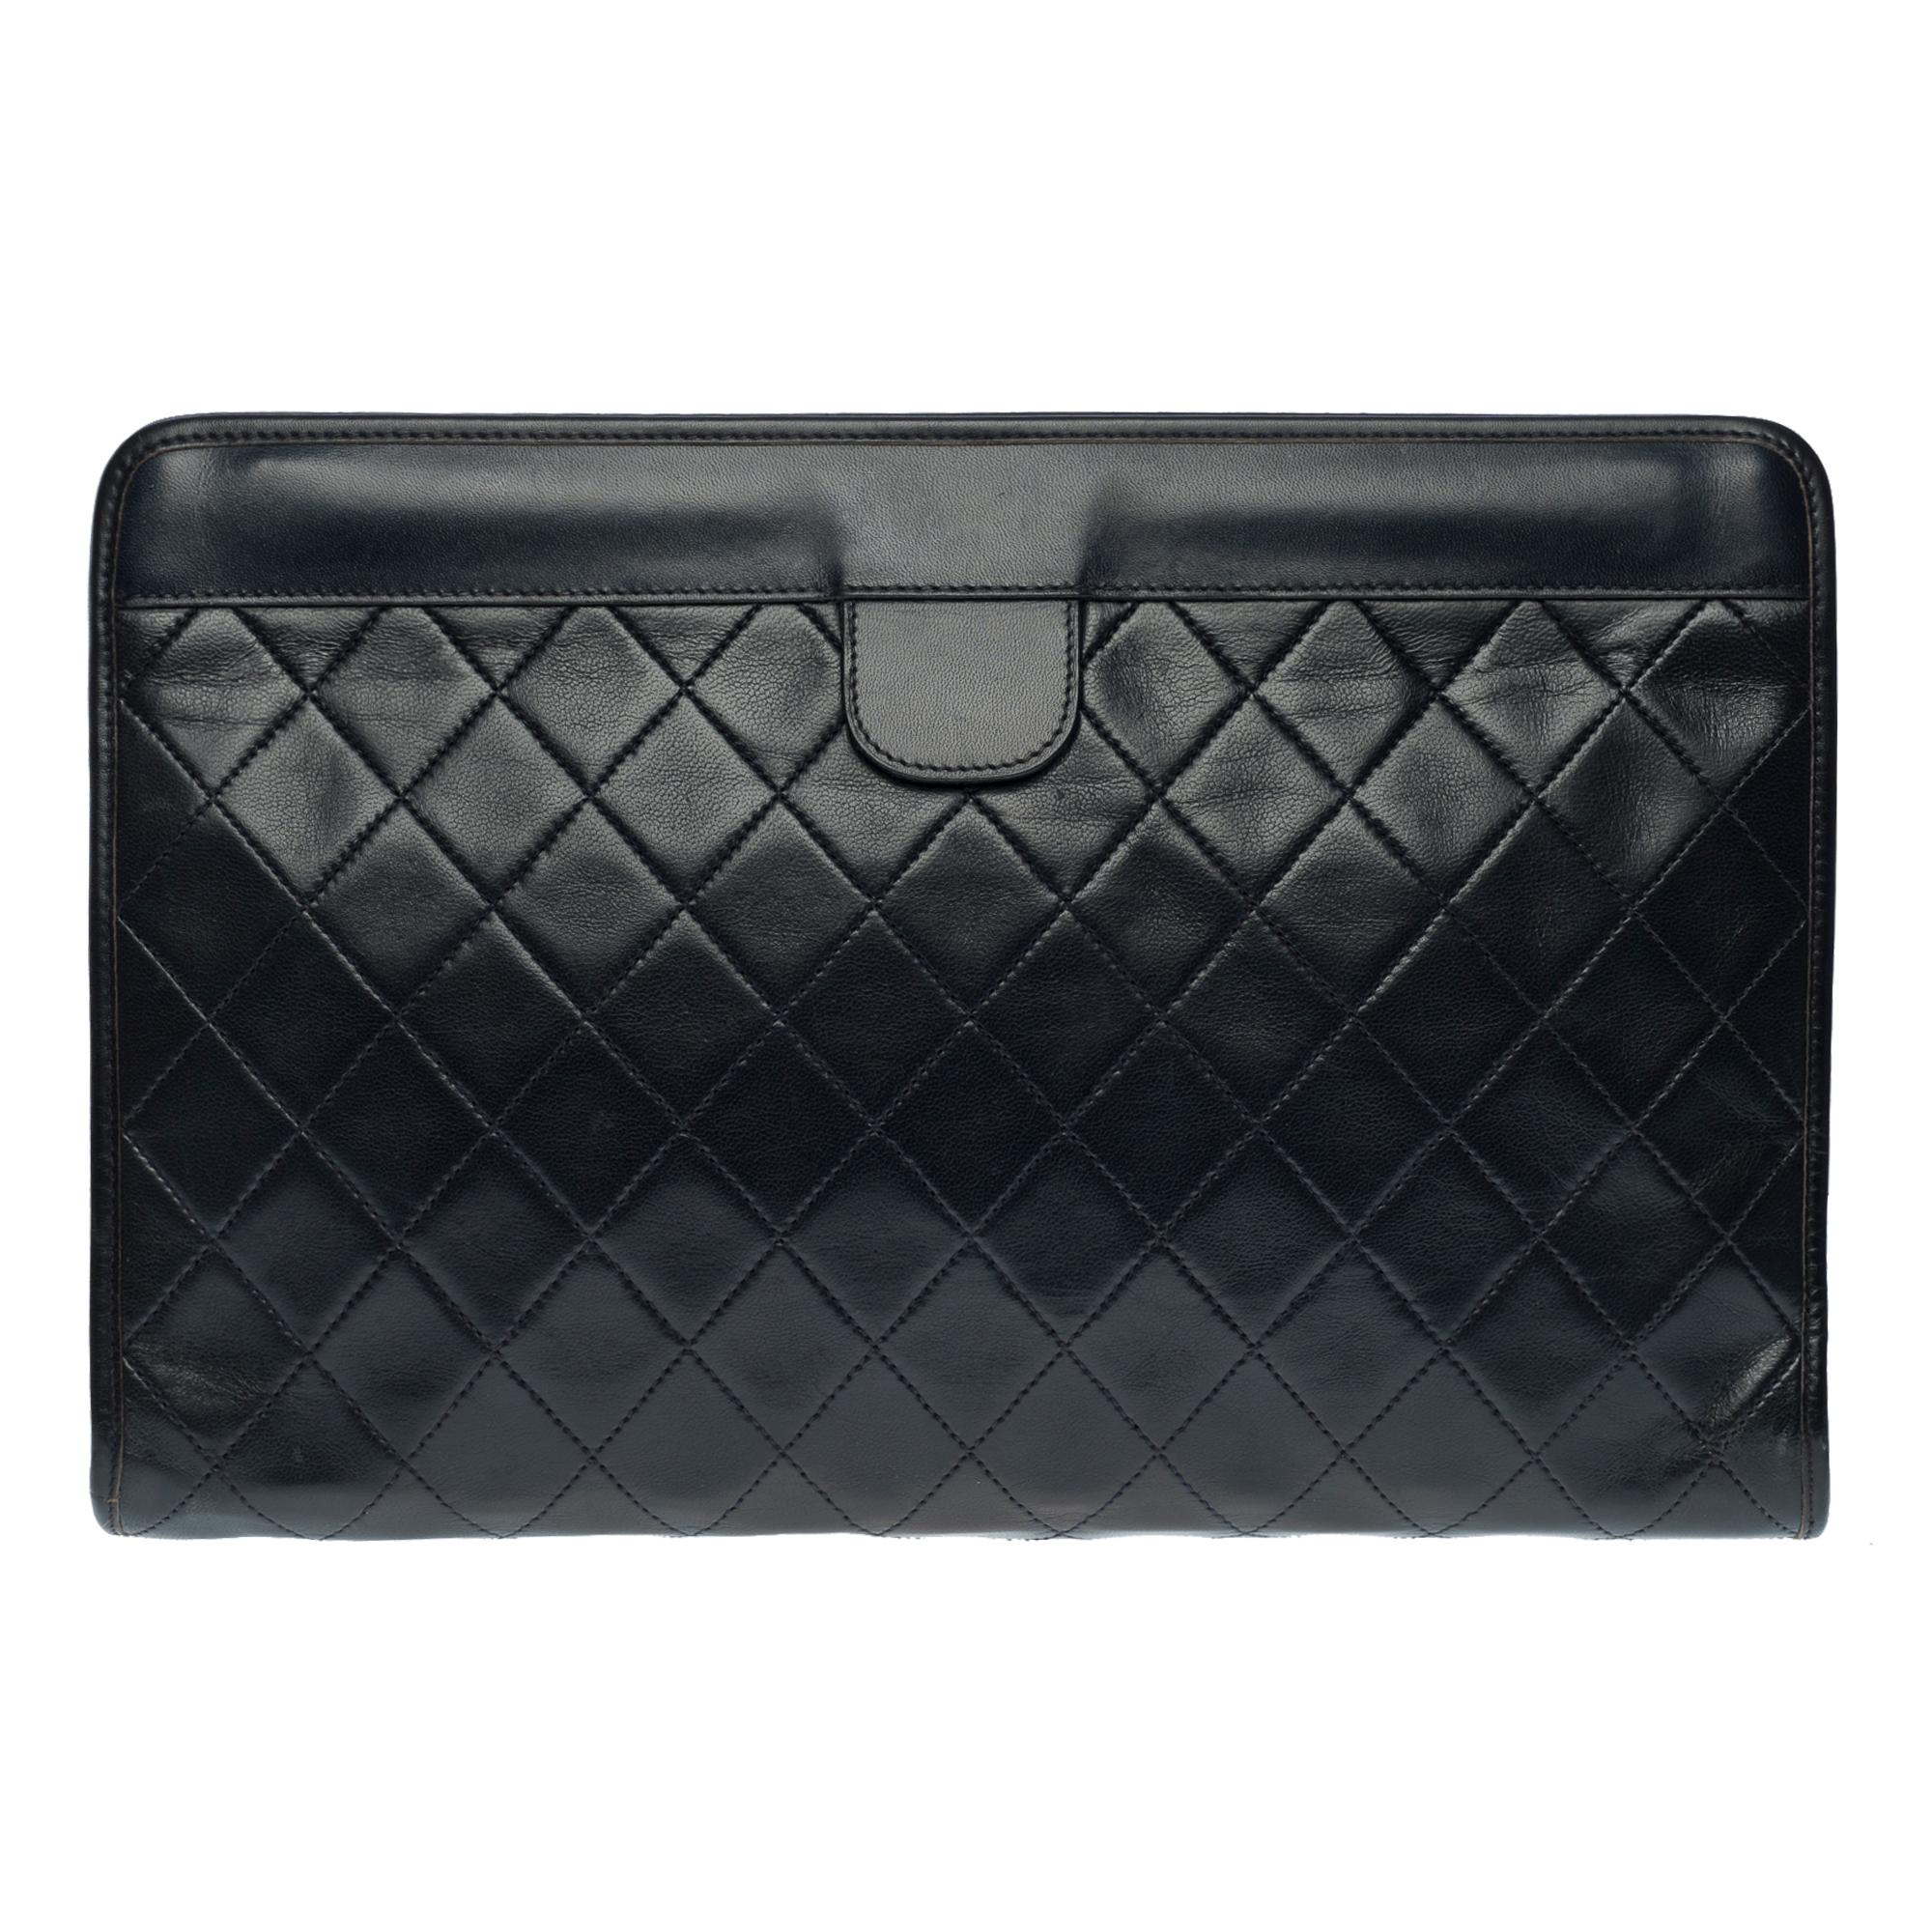 Lovely Chanel Hand Clutch/Clutch Pouch in black quilted lambskin leather, gold plated metal hardware for a handheld

Opening from the top to the top, hinges at the extremes
Gold-tone metal CC logo on black leather tab at front, black leather tab at